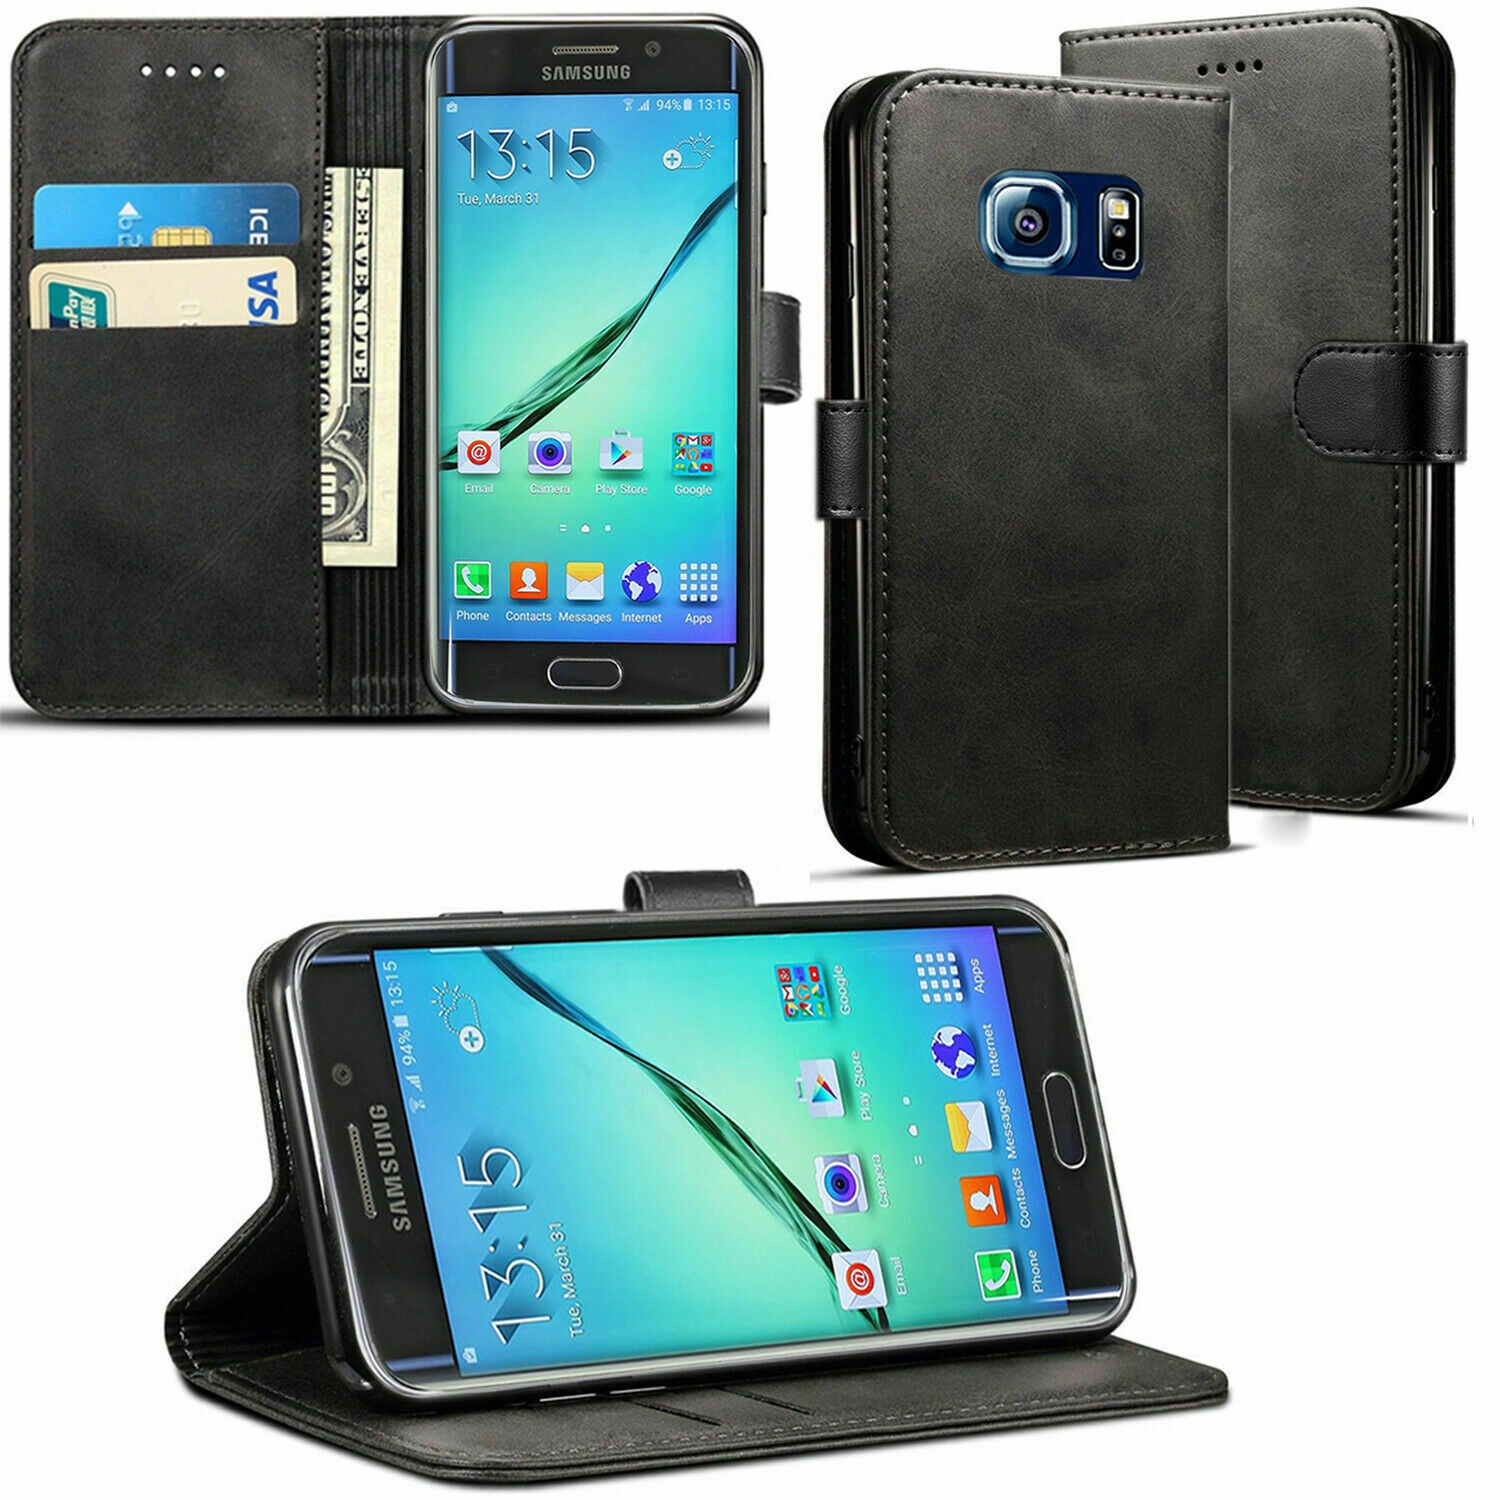 【CSmart】 Magnetic Card Slot Leather Folio Wallet Flip Case Cover for Samsung Galaxy S6, Black